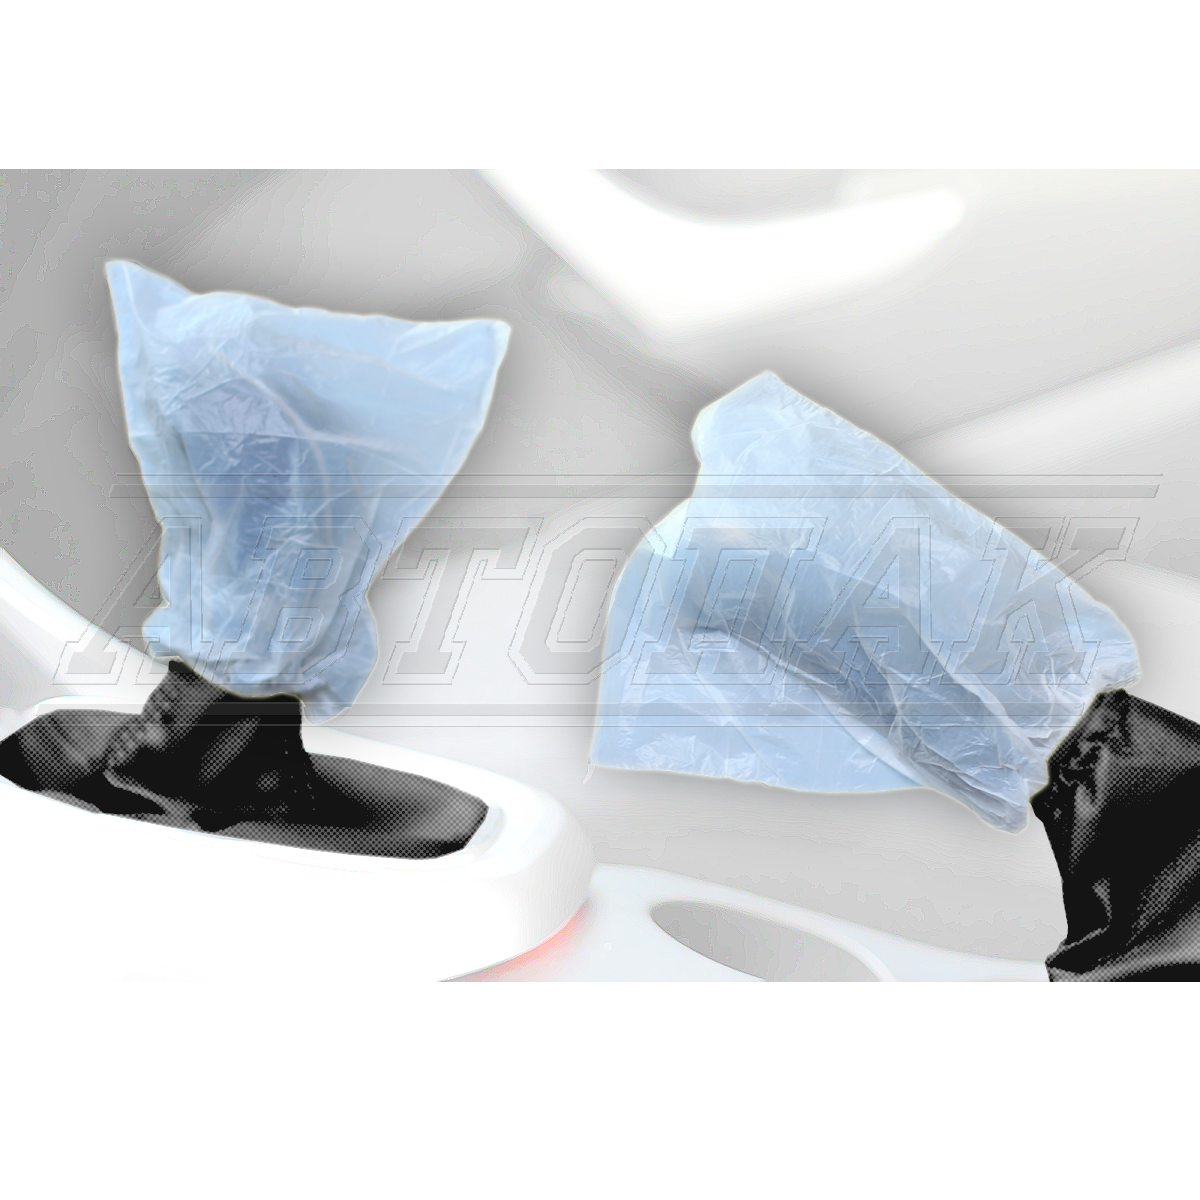 Disposable covers for the gearshift and handbrake